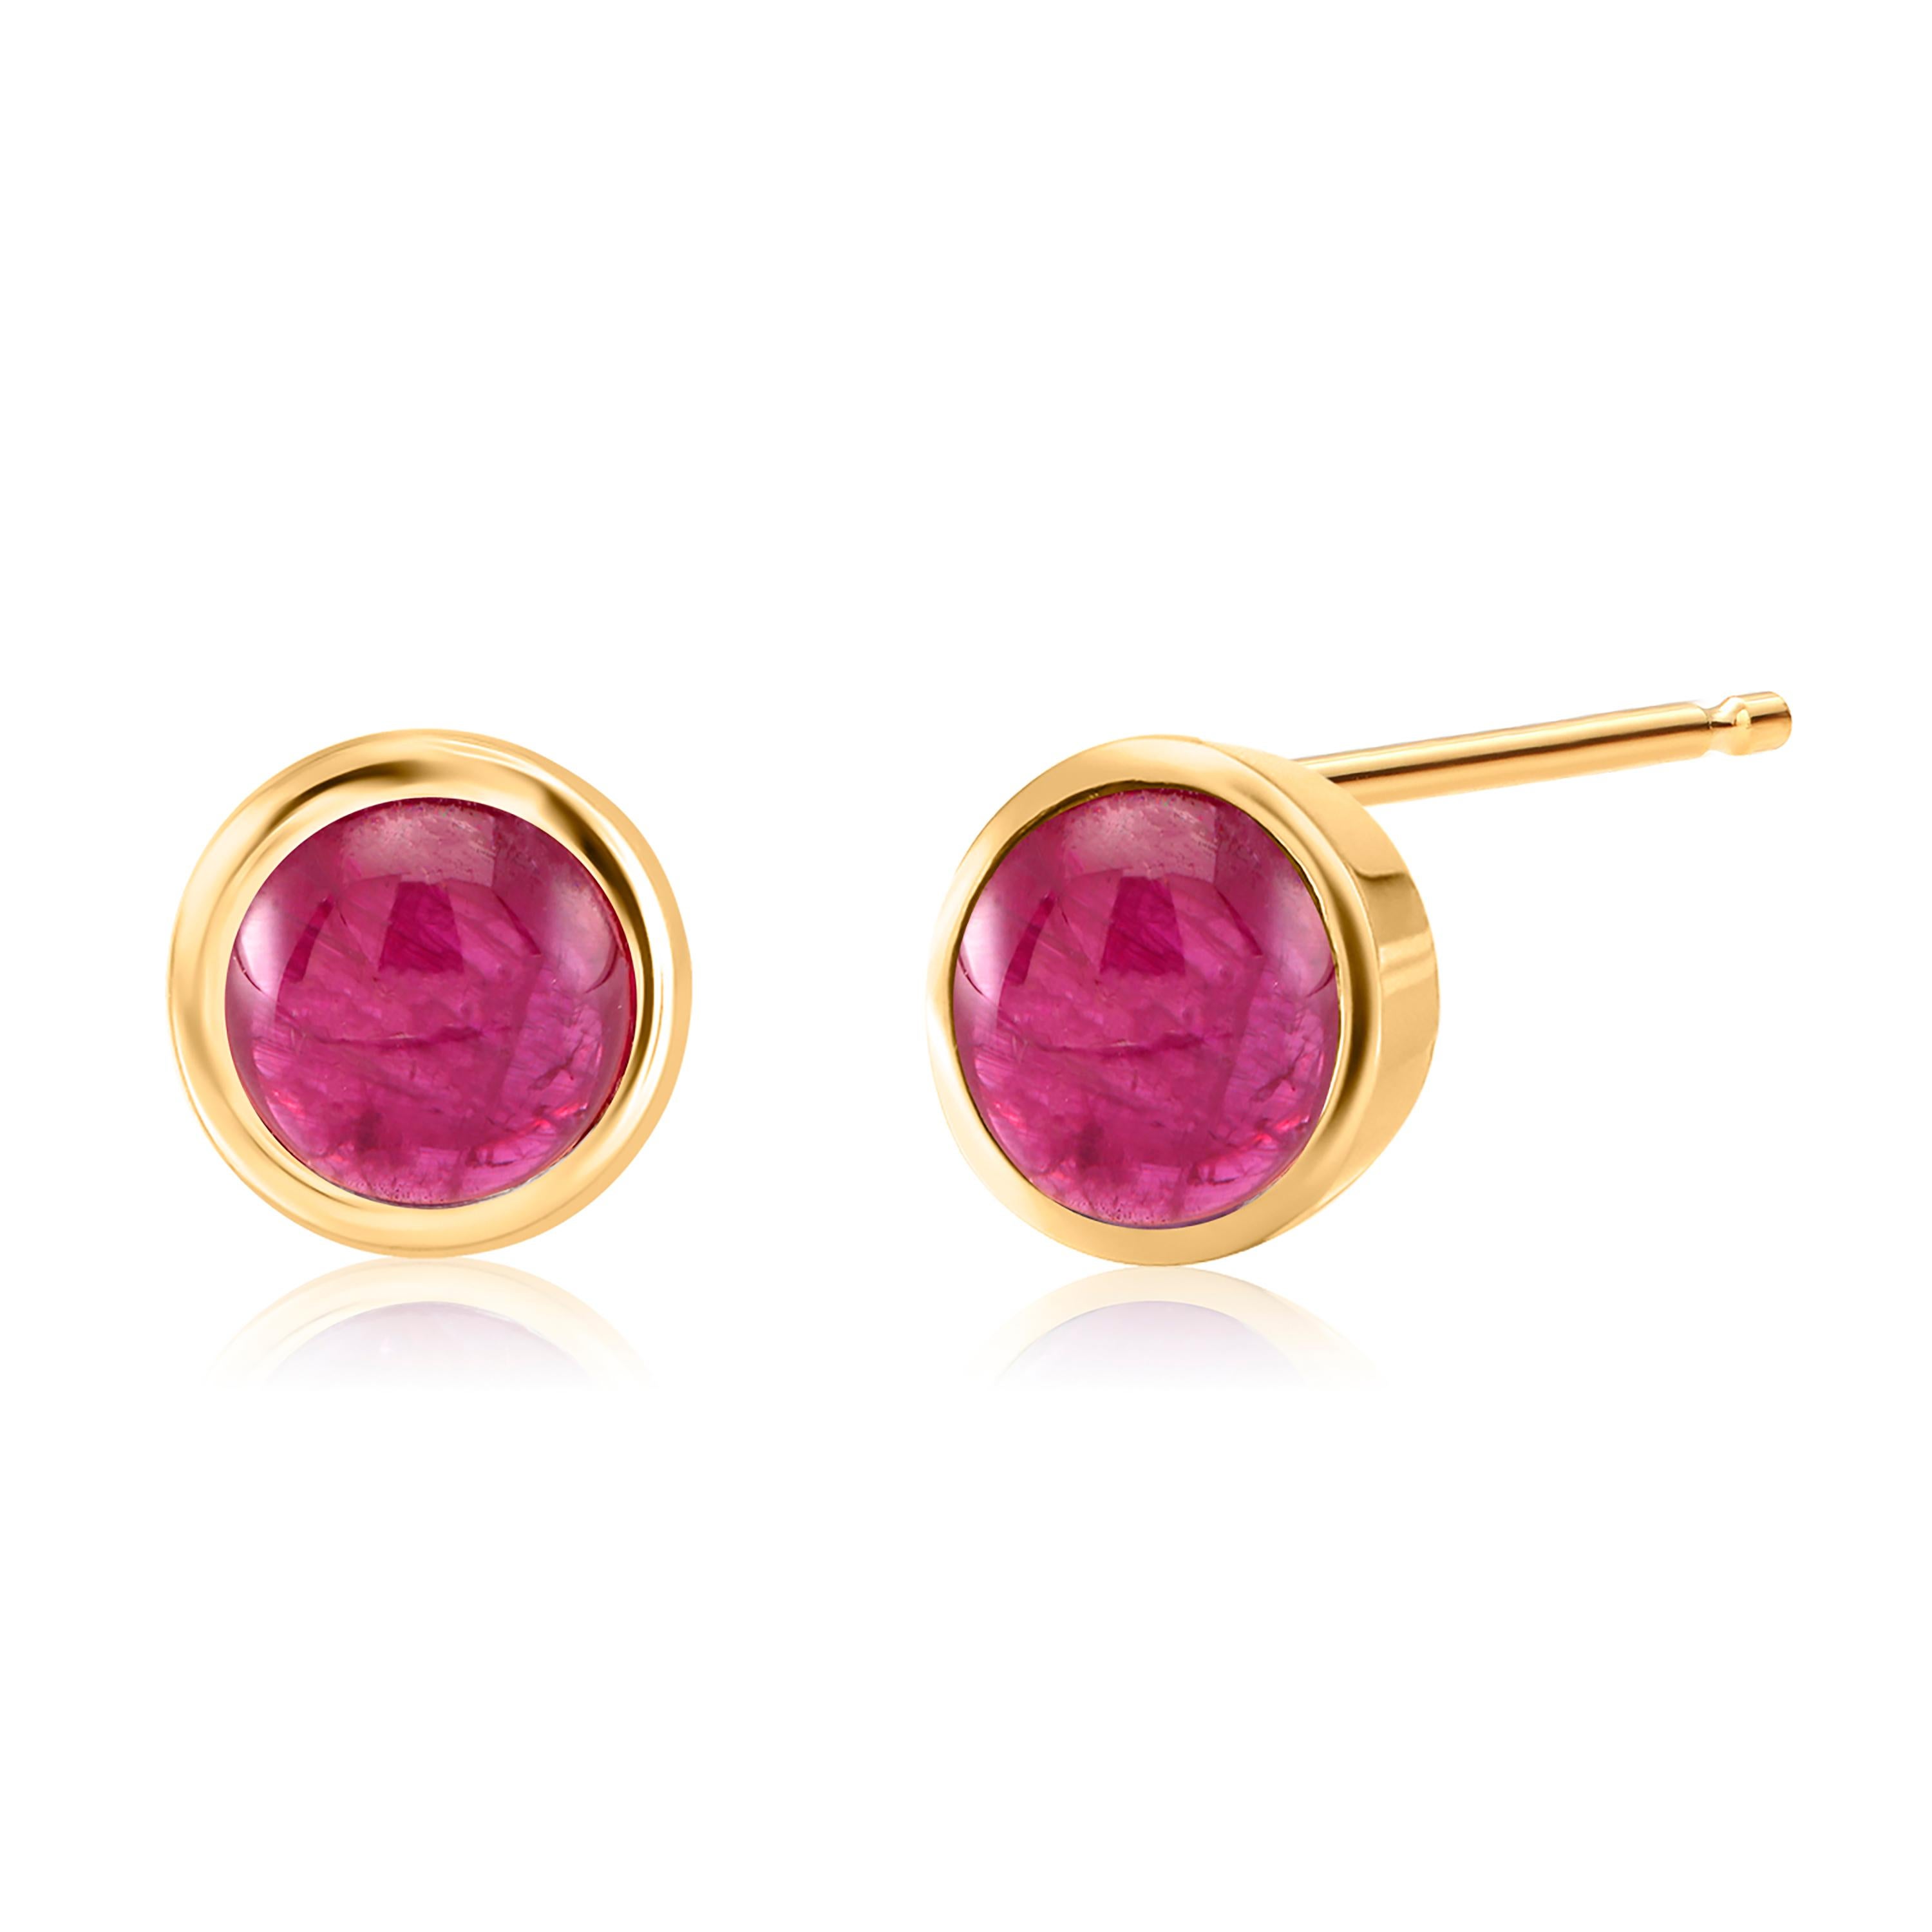 Matched Cabochon Ruby 2.95 Carat Bezel Set Yellow Gold 0.25 Inch Stud Earrings 2